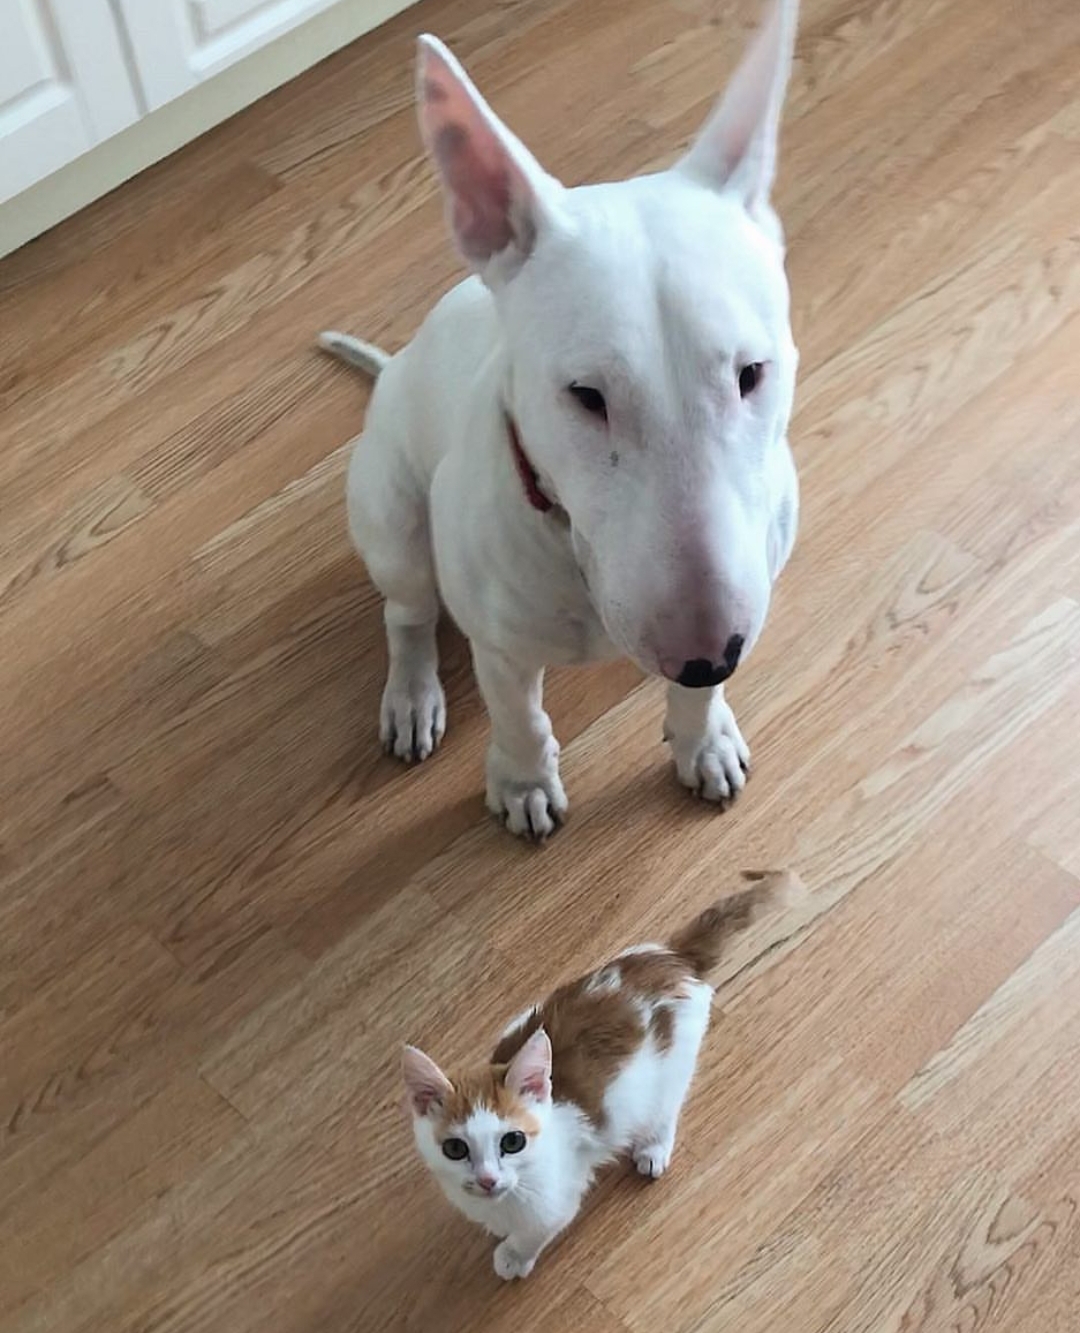 English Bull Terrier sitting on the floor with a kitten